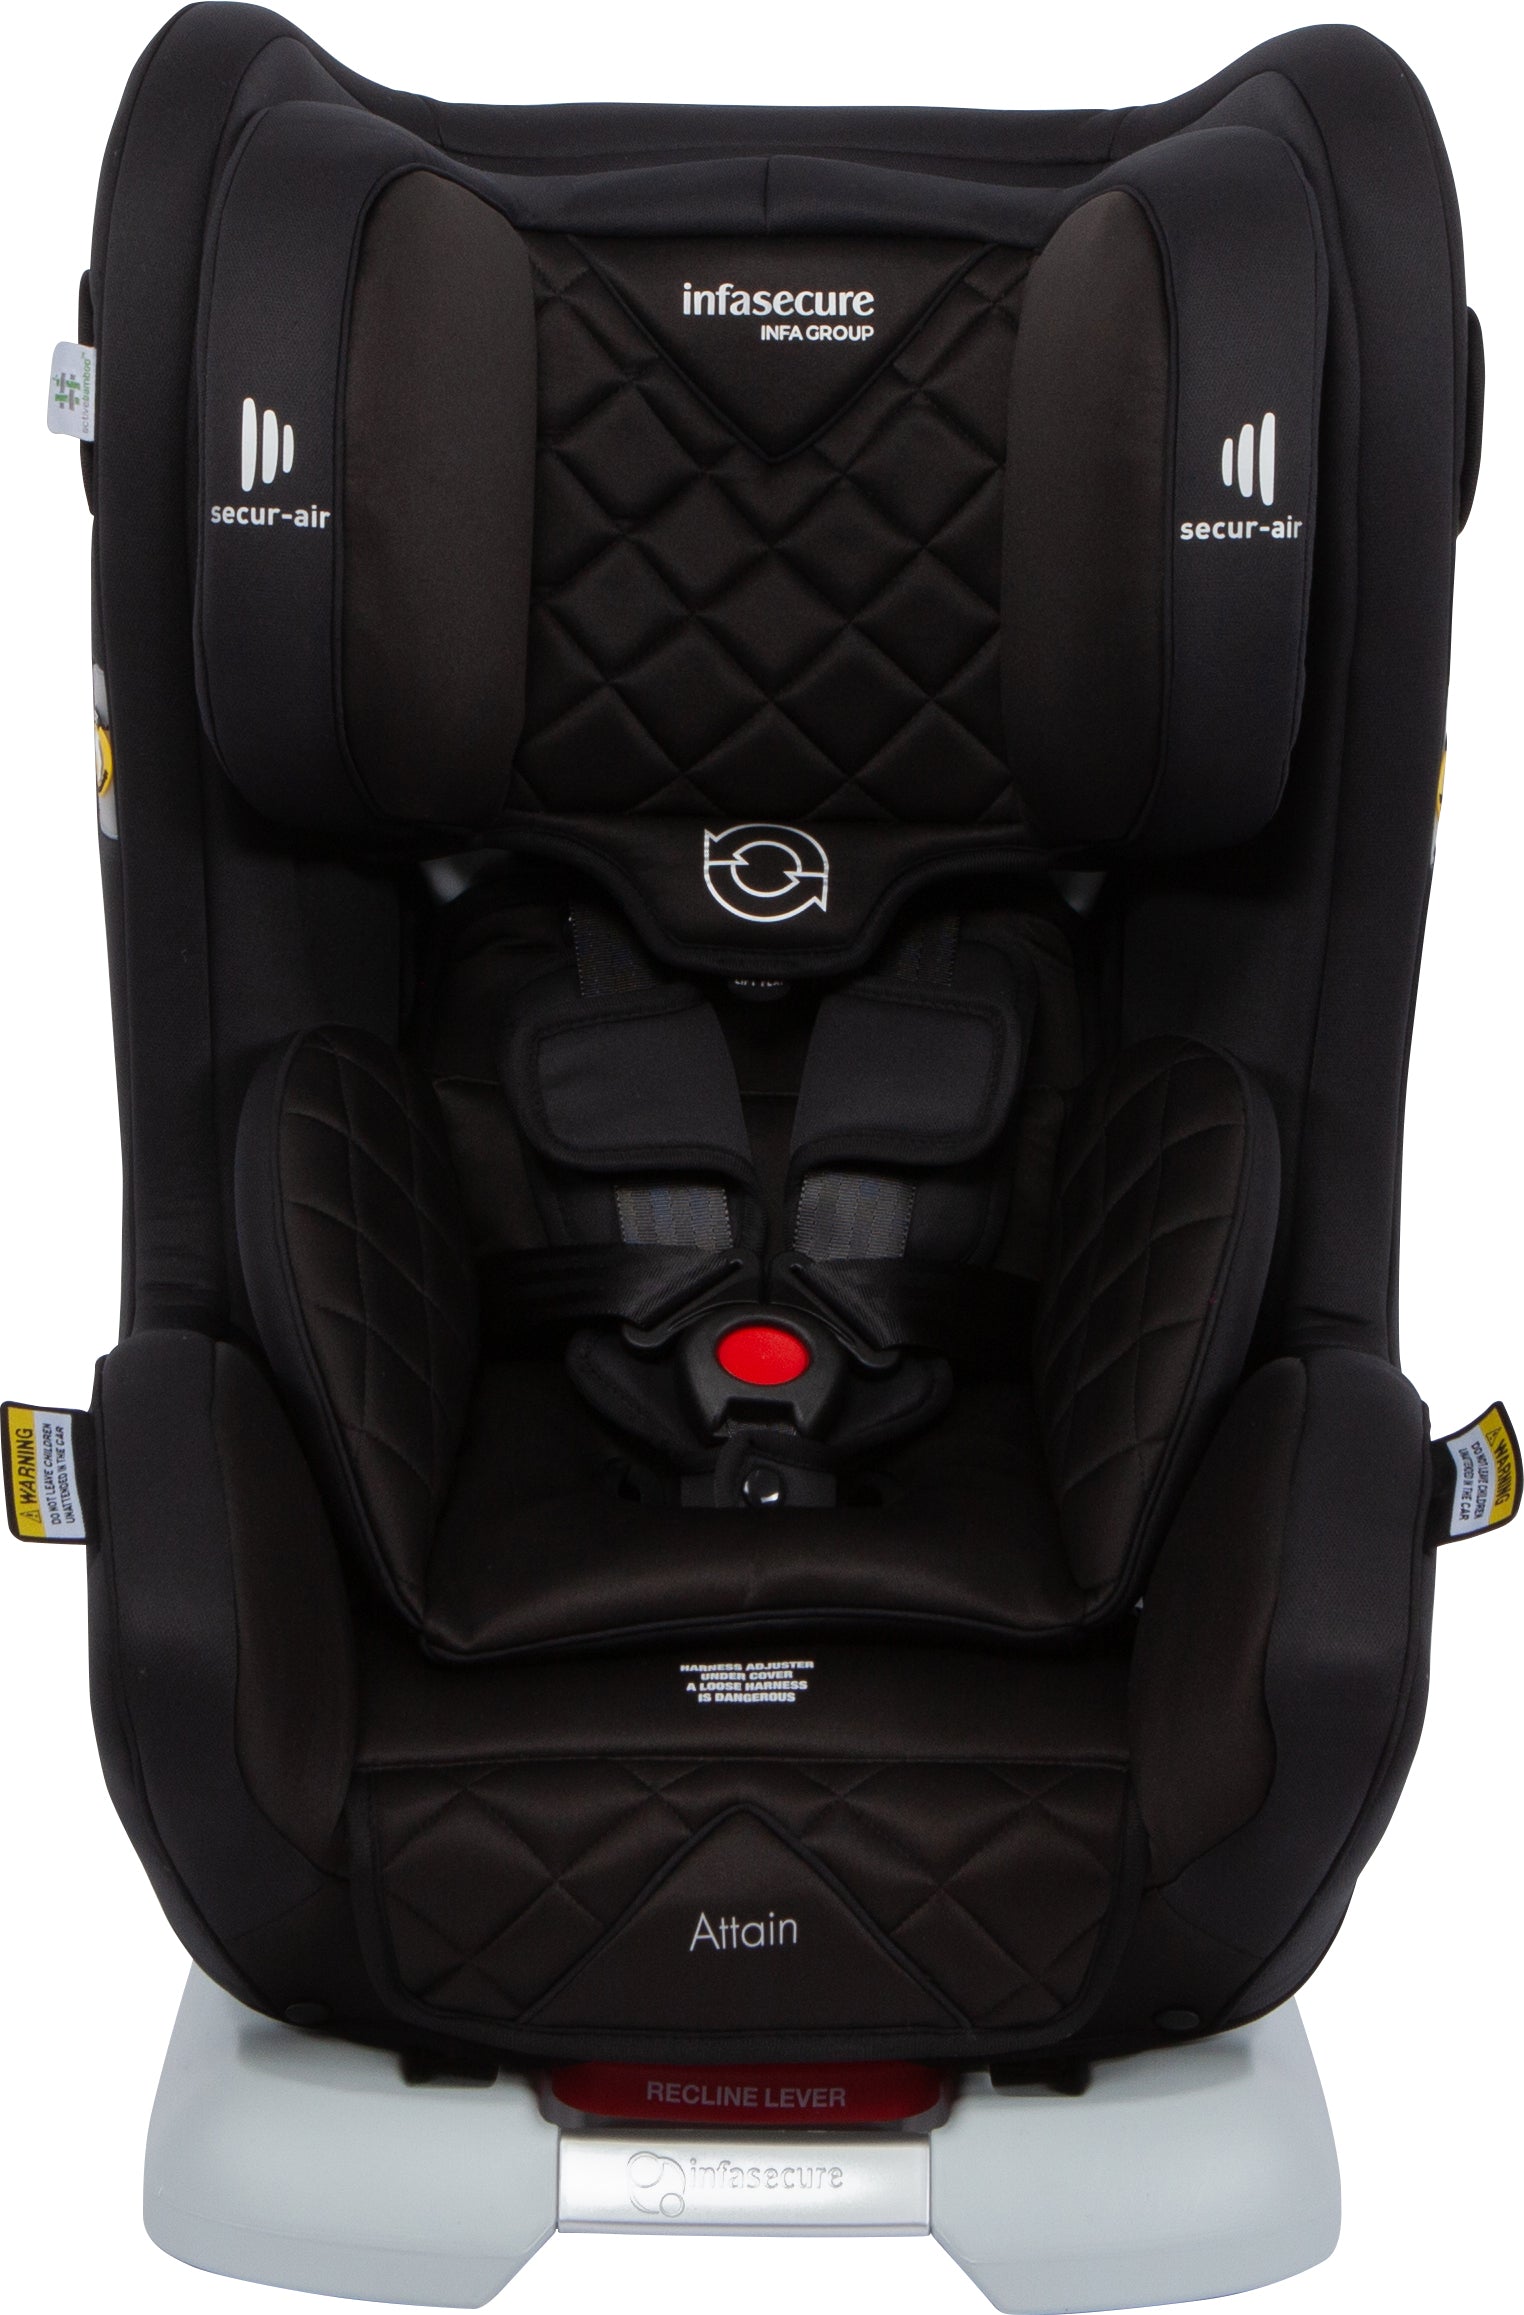 InfaSecure Attain More Isofix Compatible 0-4yrs - Local pick up only